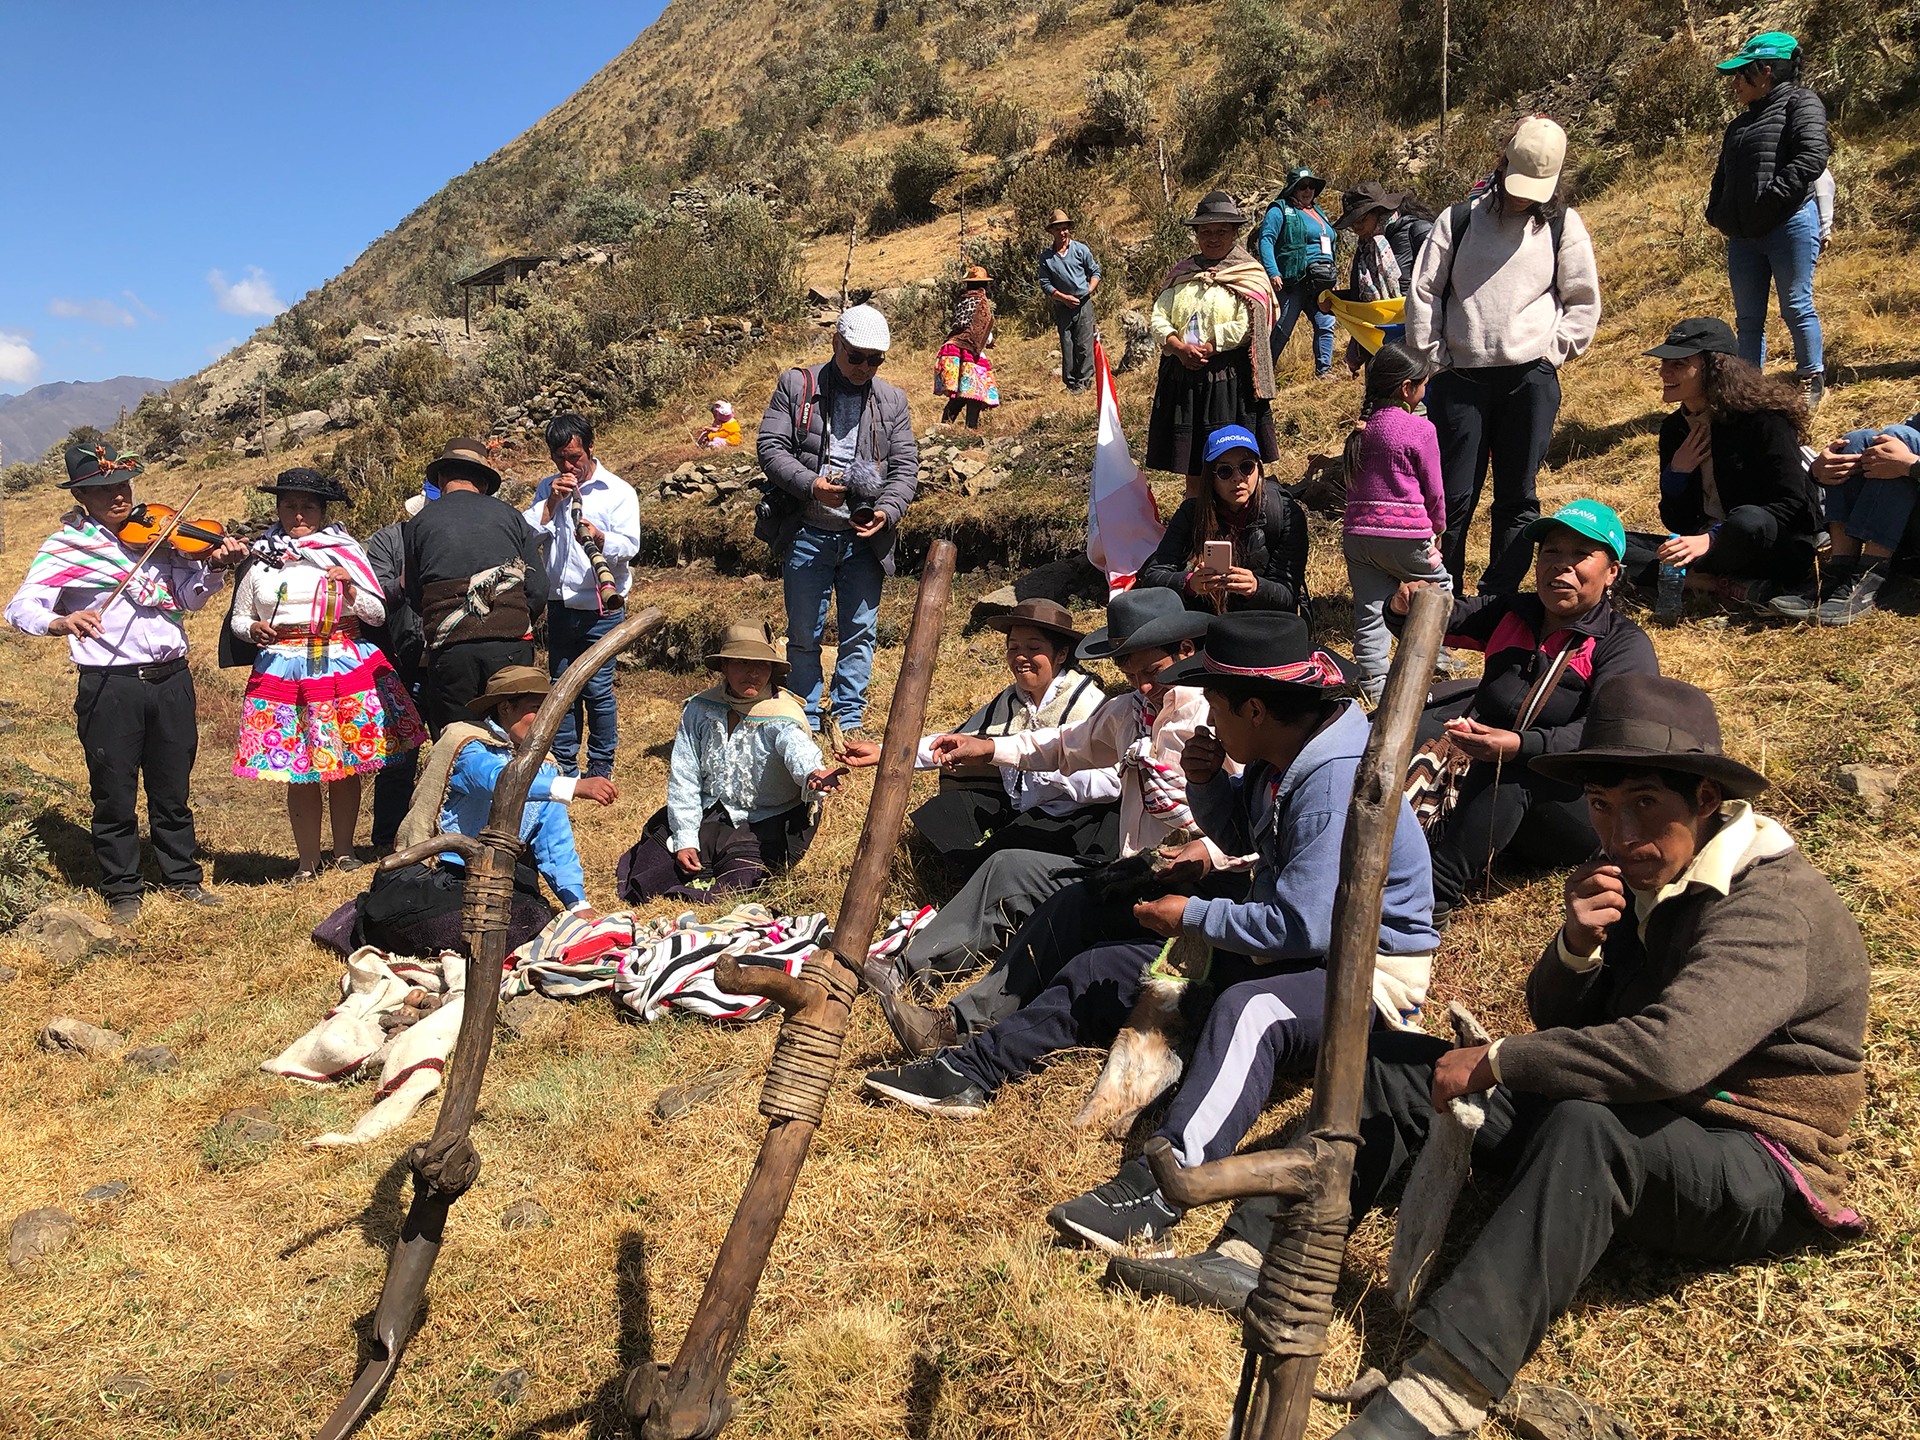 A group of people gathering on the side of the mountain. Some are sitting while others are standing. A few people have musical instruments including a horn,  tambourine and violin.